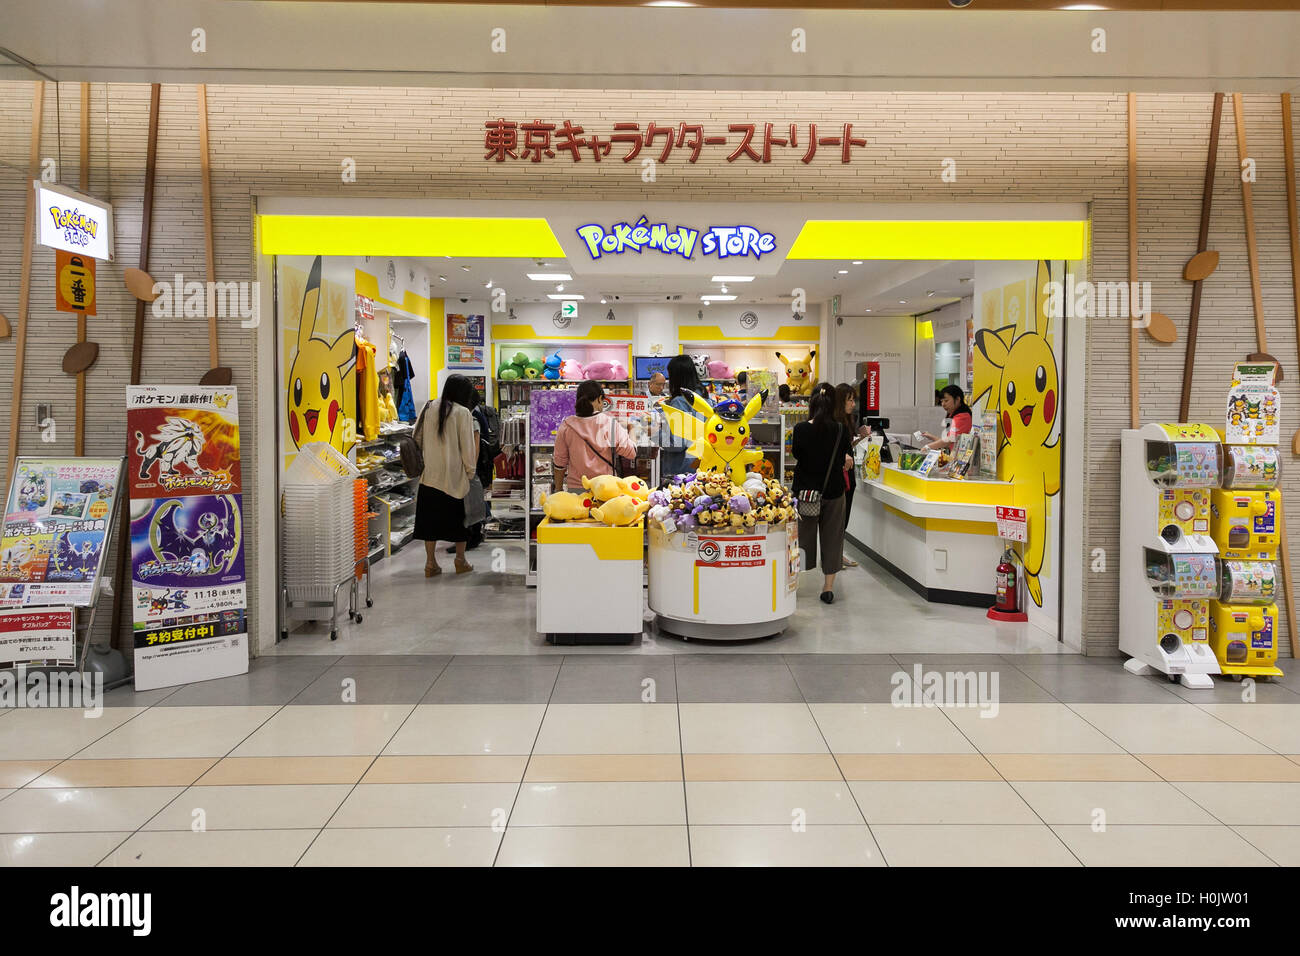 Tokyo Japan 21st September 16 Customers Shop At Pokemon Store At Tokyo Station On September 21st 16 Tokyo Japan The Pokemon Go Plus Wearable Accessory Completely Sold Out Online And At The